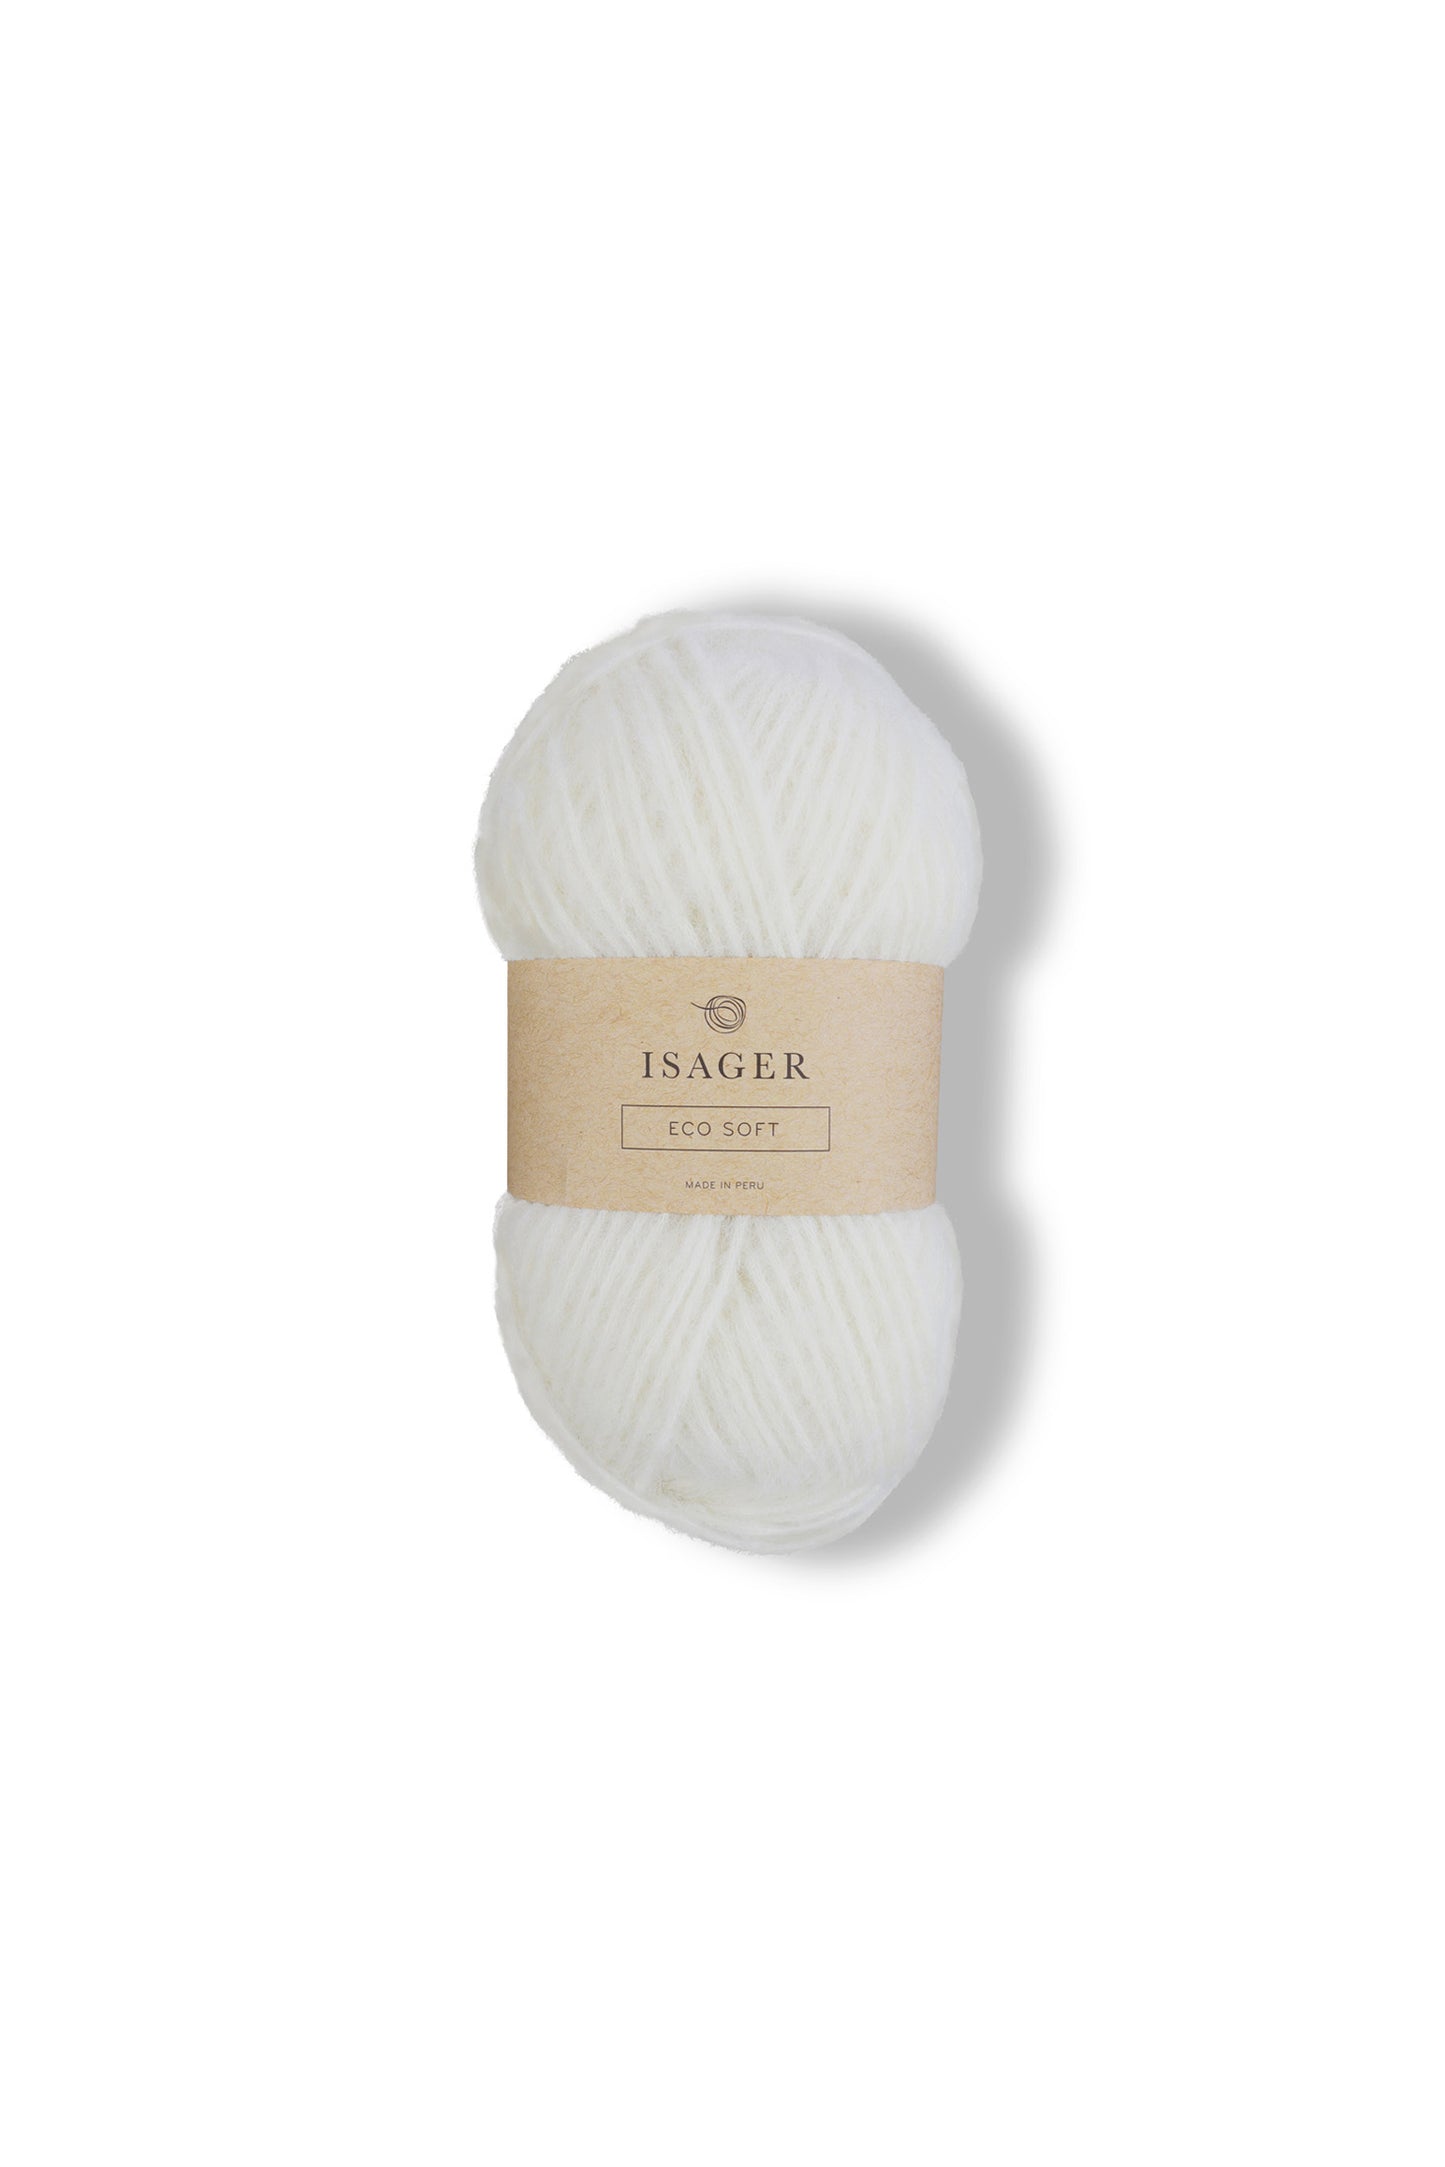 Isager - Eco Soft